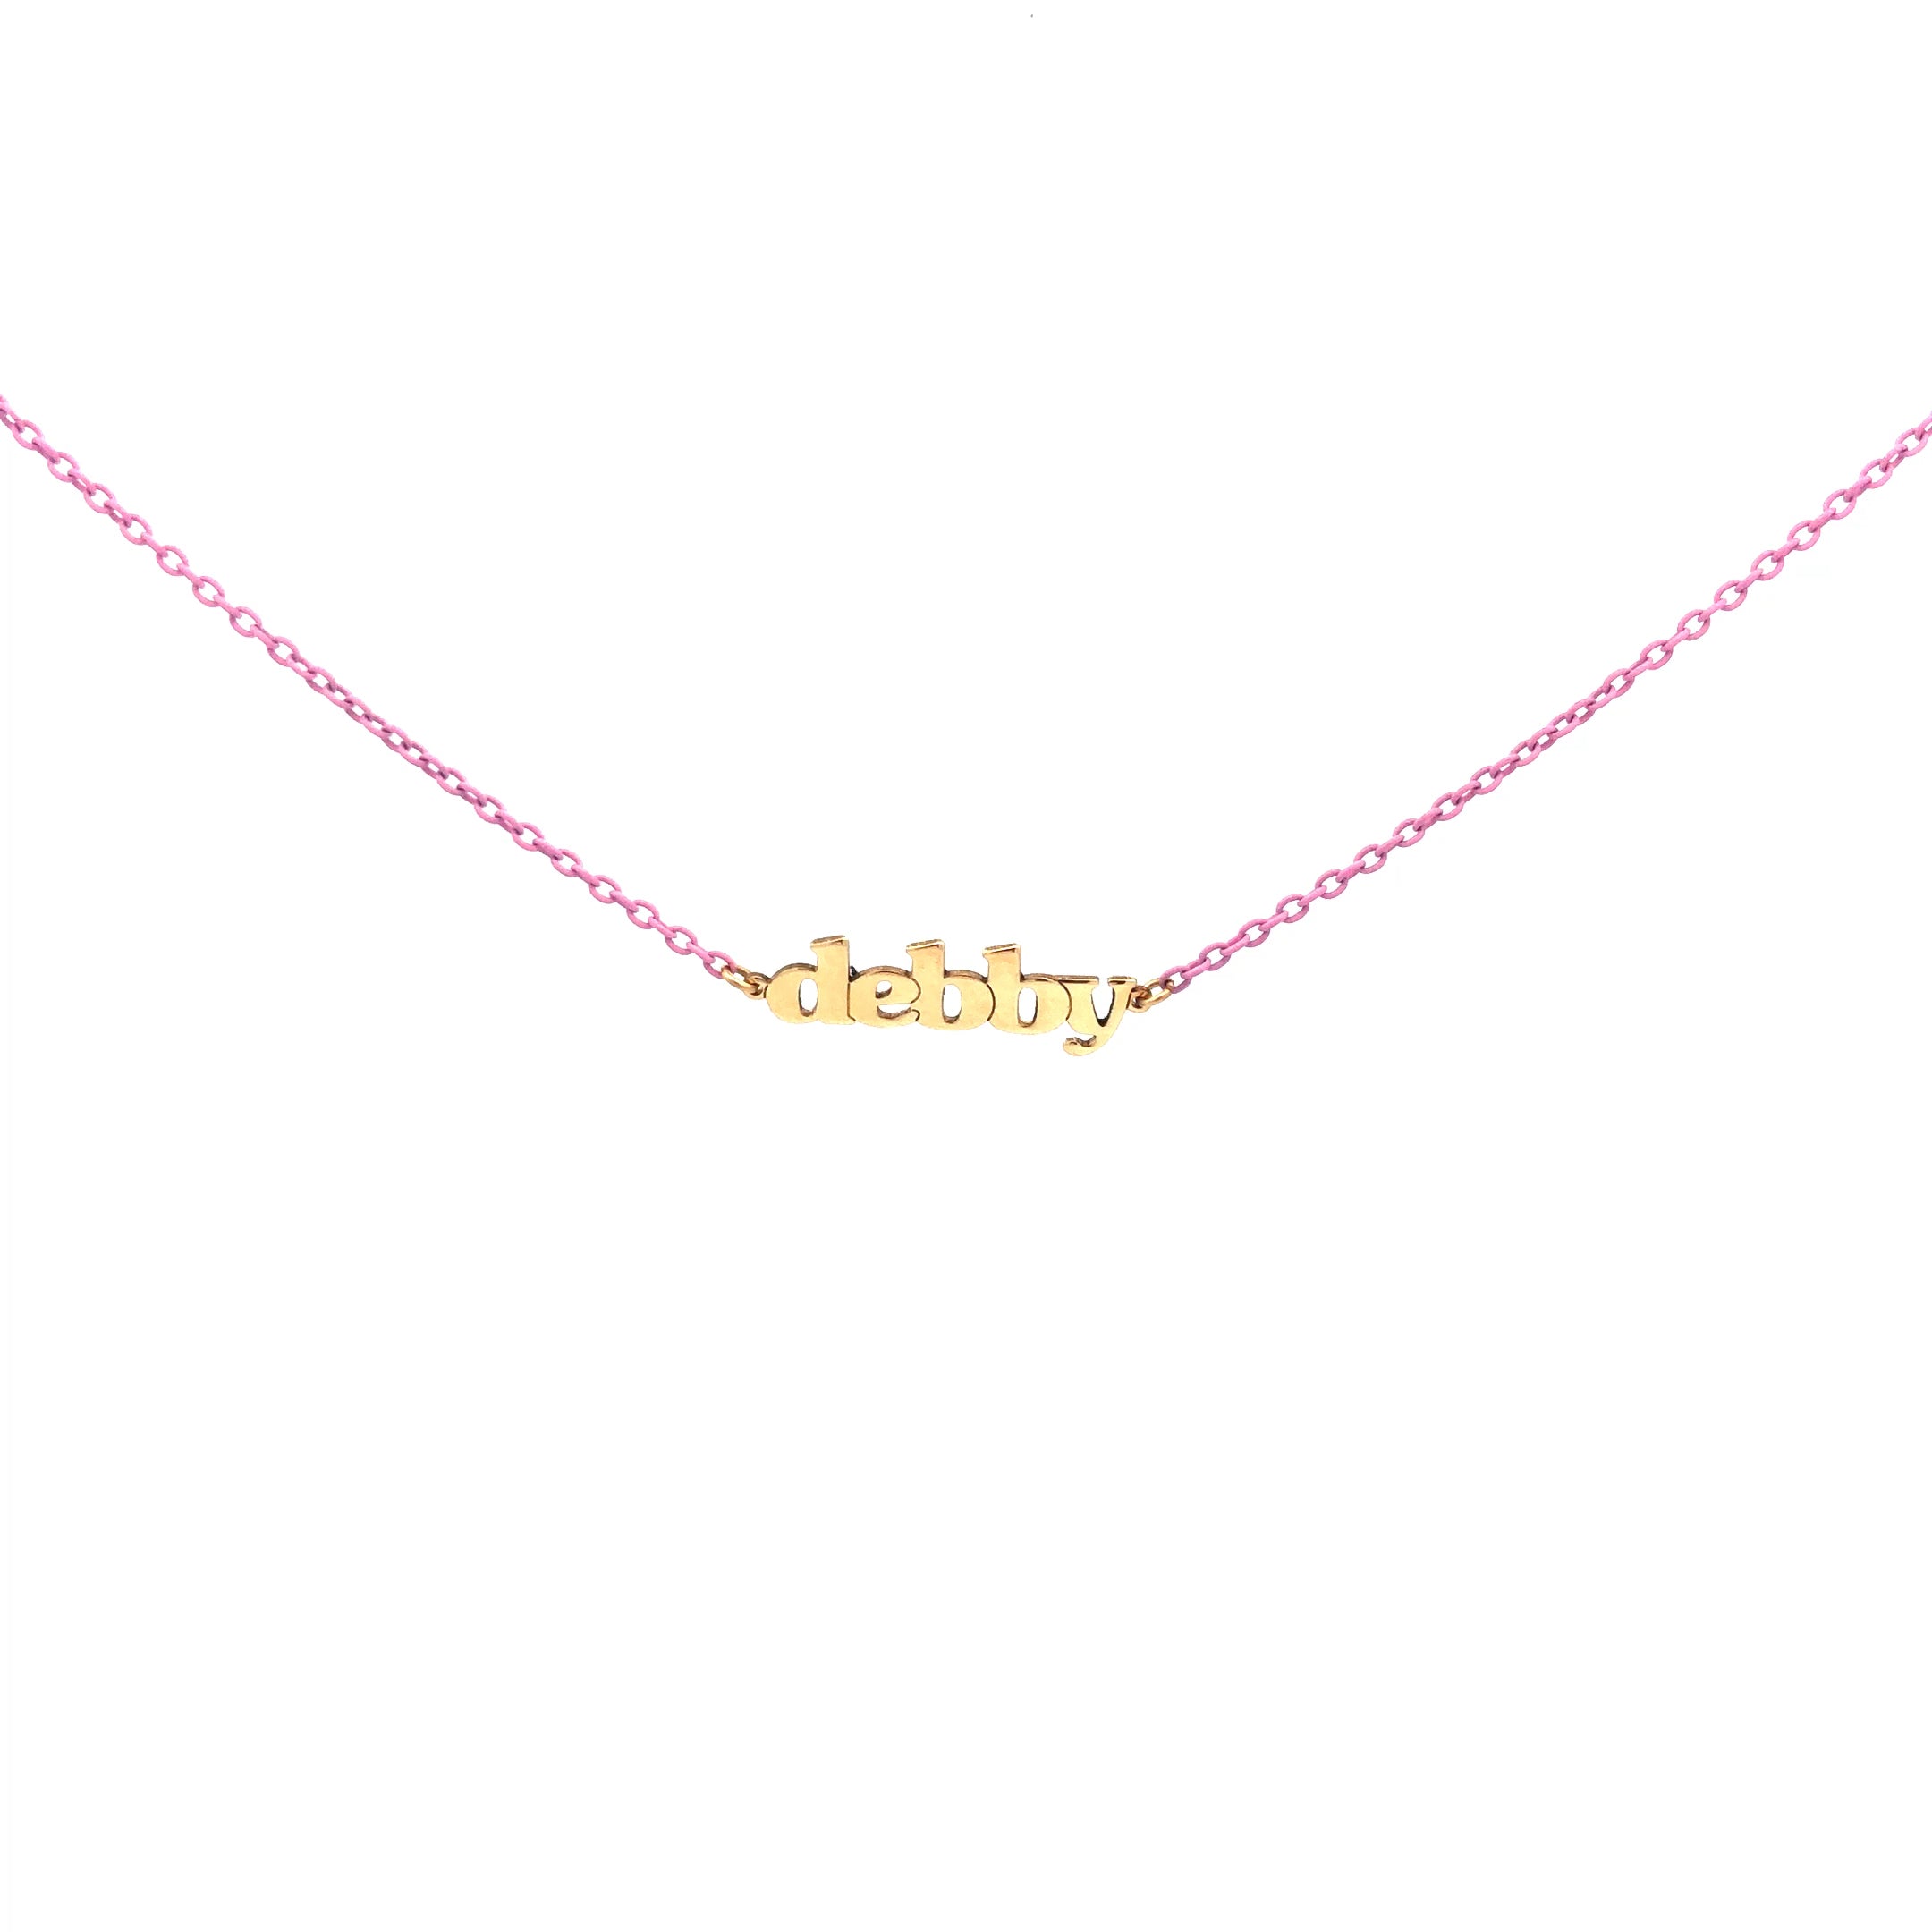 Chokers - Customizable Golden Mate choker colored chain – ORO18KT - 2 | Rue des Mille